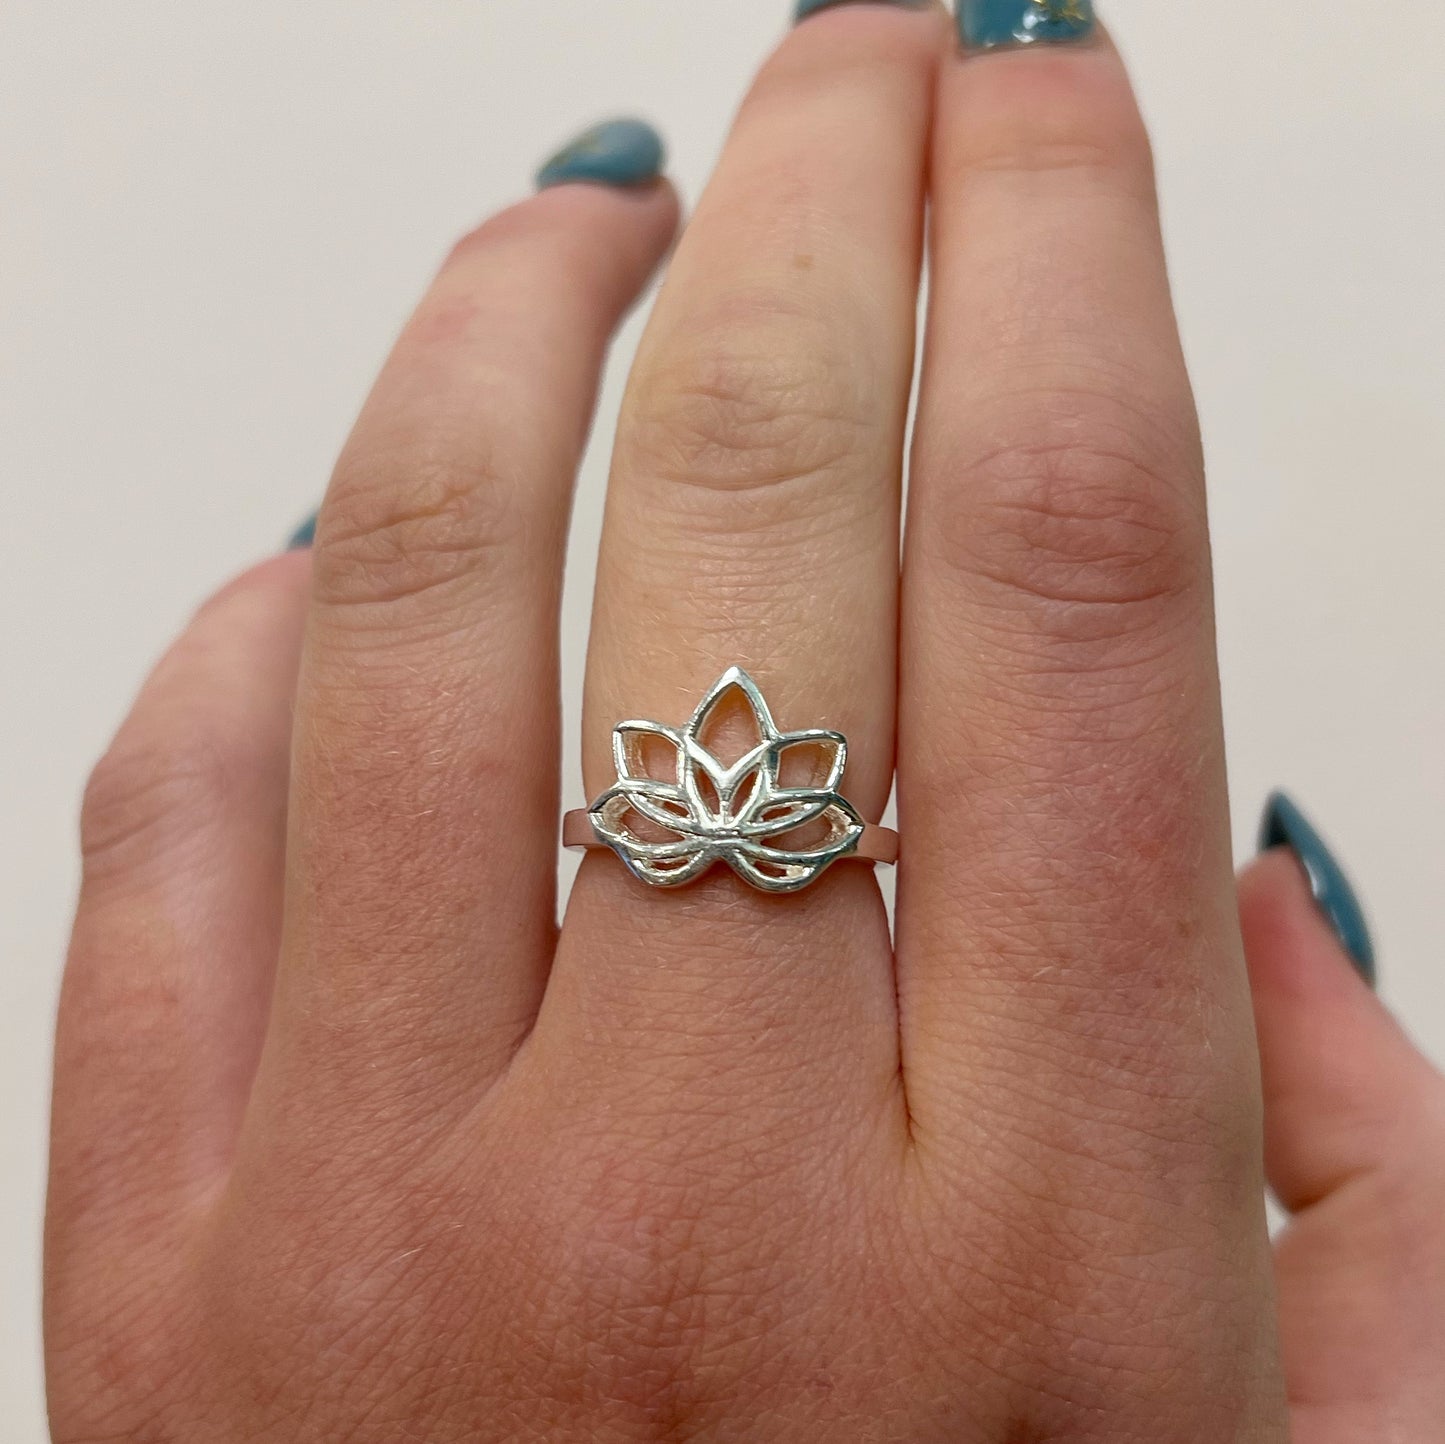 Sterling Silver Lotus Flower Ring  - Size L